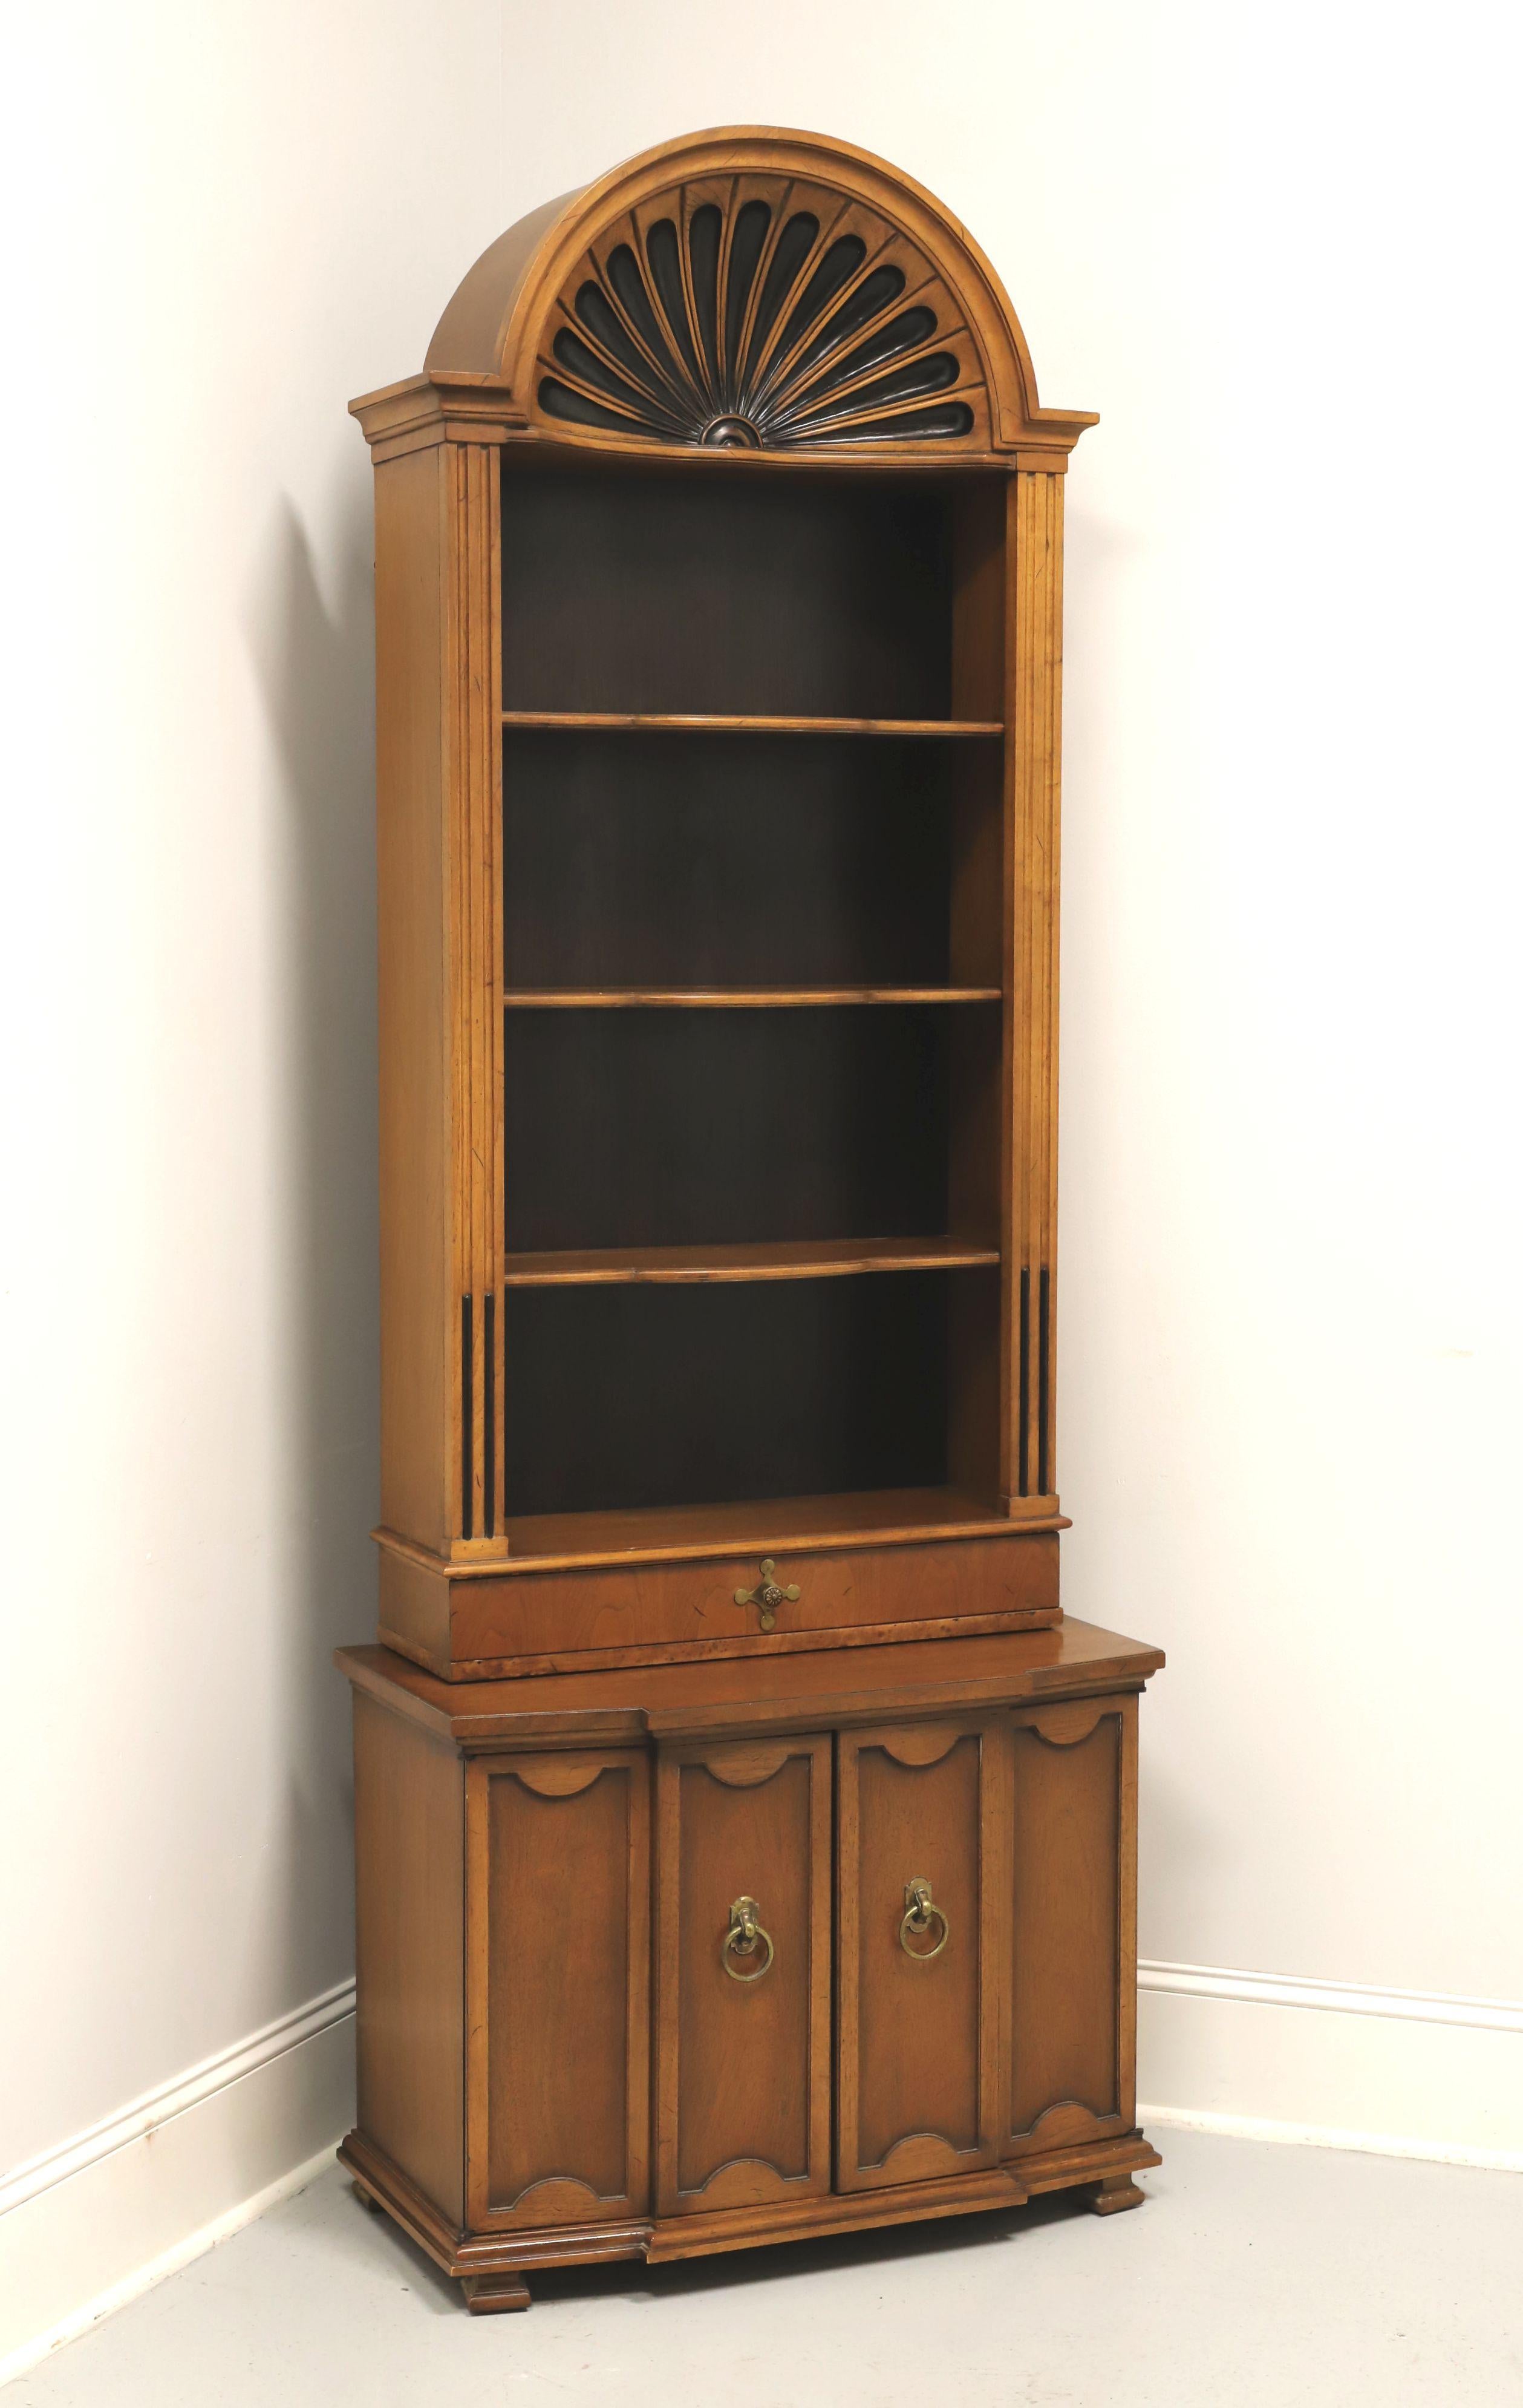 TOMLINSON 1960's Neoclassical Console Cabinet with Carved Arch Bookcase For Sale 4